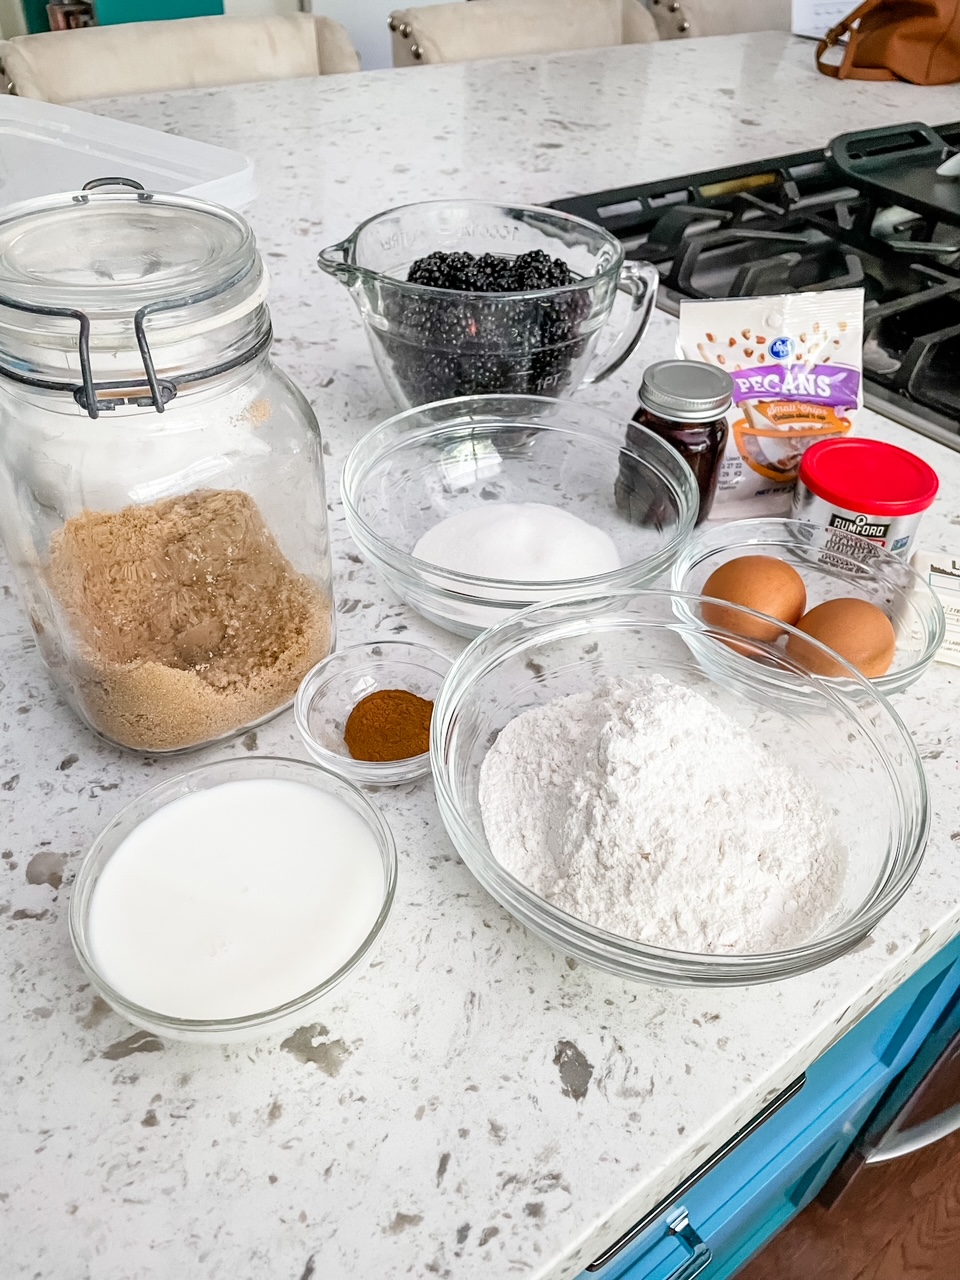 The ingredients - flour, sugar, berries, eggs and more, lined up on a counter.